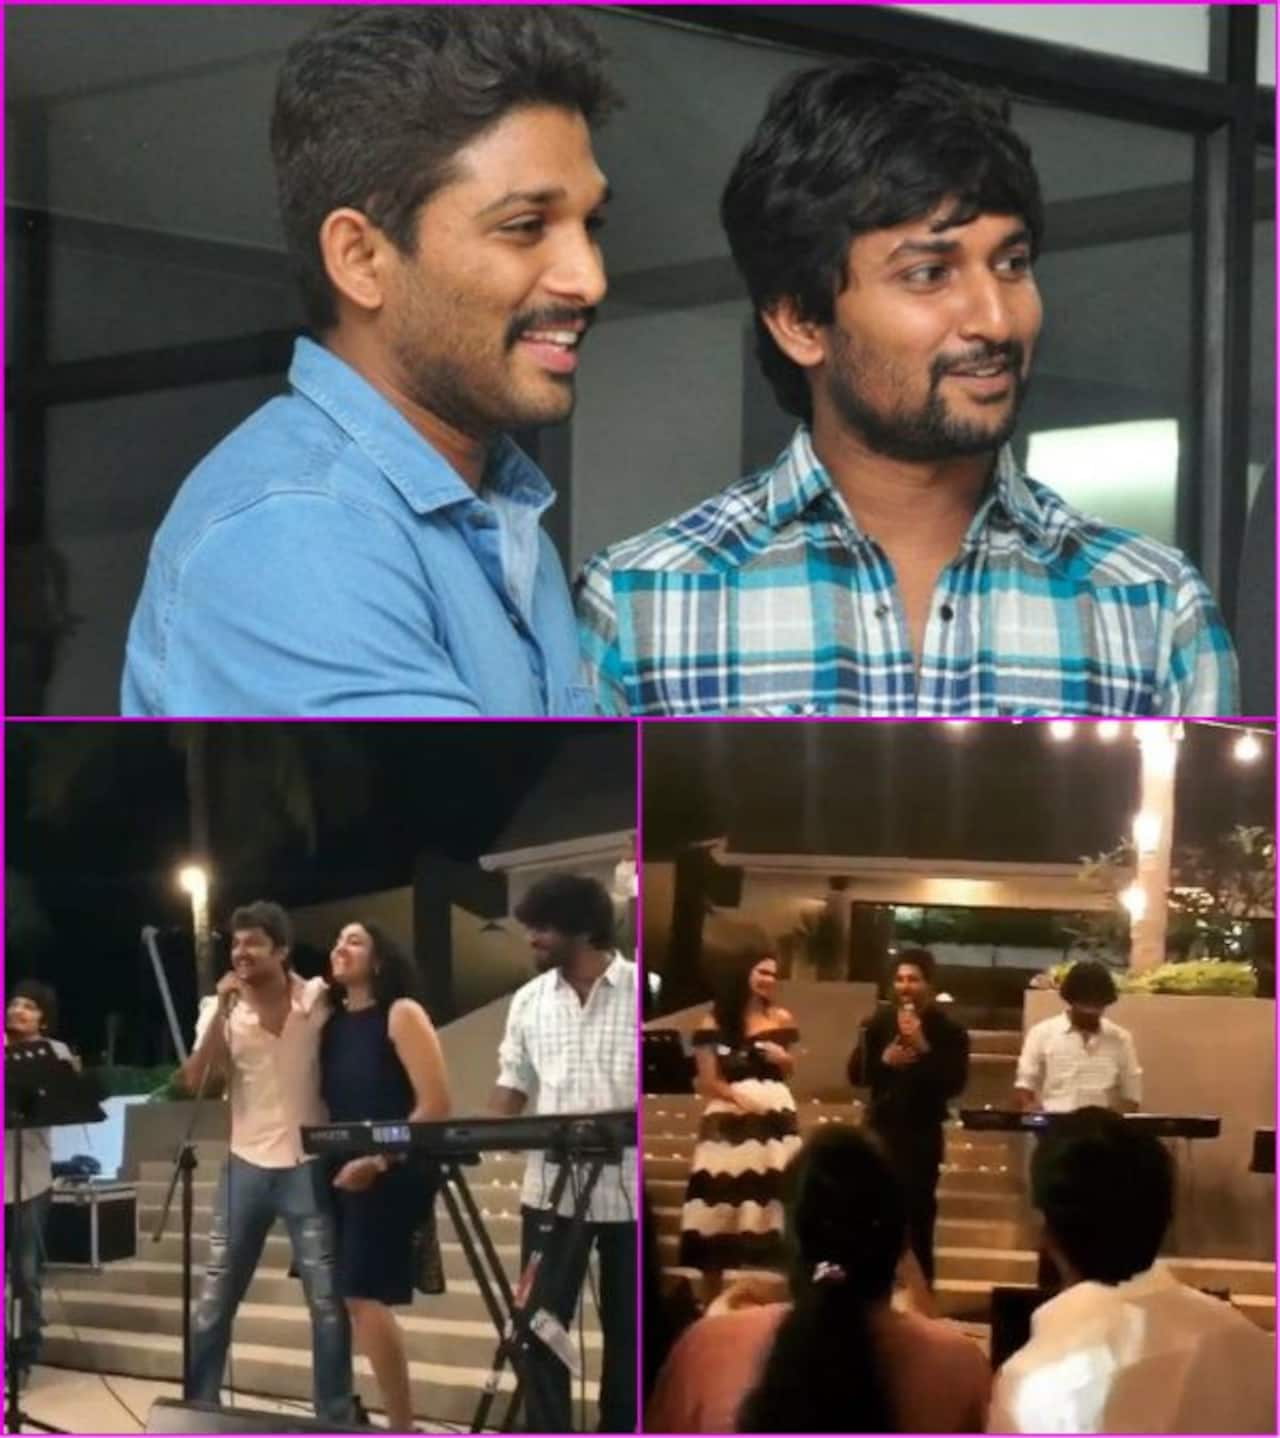 All videos] Nani and Allu Arjun sing songs and make merry at their friend's  wedding - Bollywood News & Gossip, Movie Reviews, Trailers & Videos at  